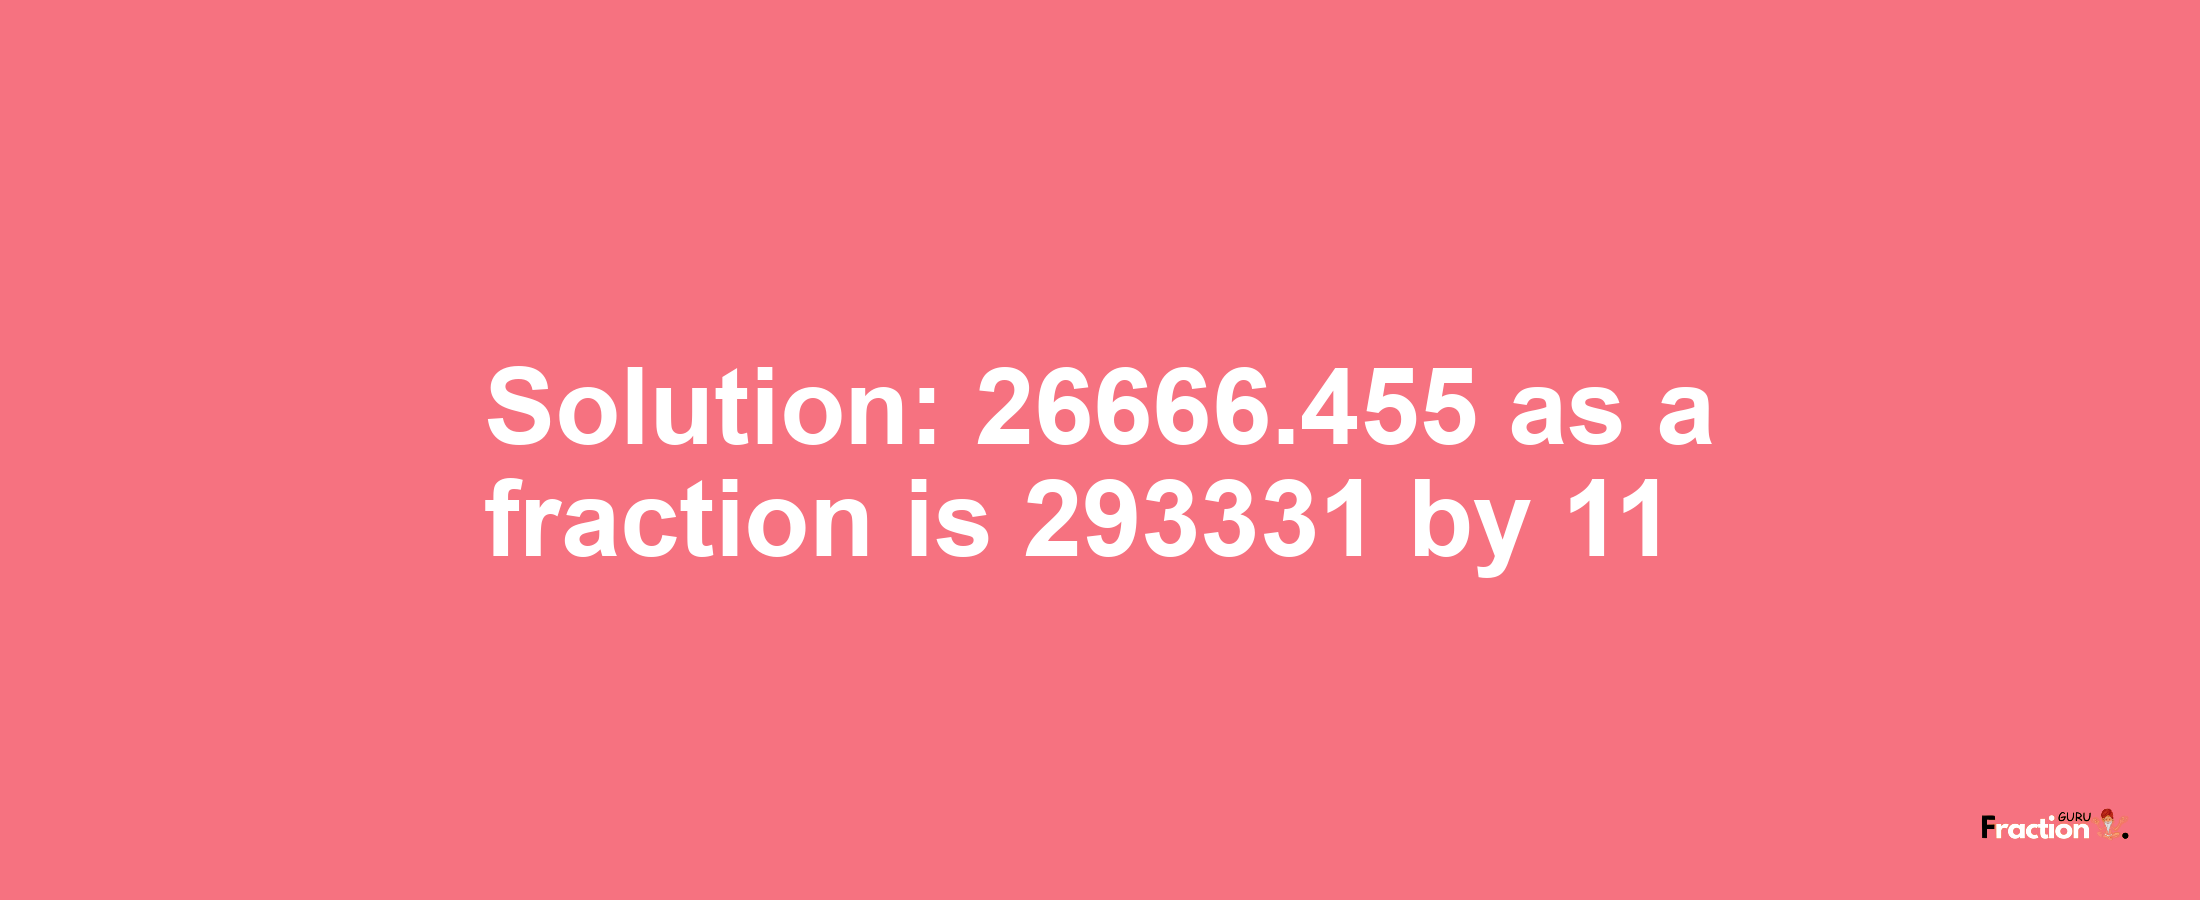 Solution:26666.455 as a fraction is 293331/11